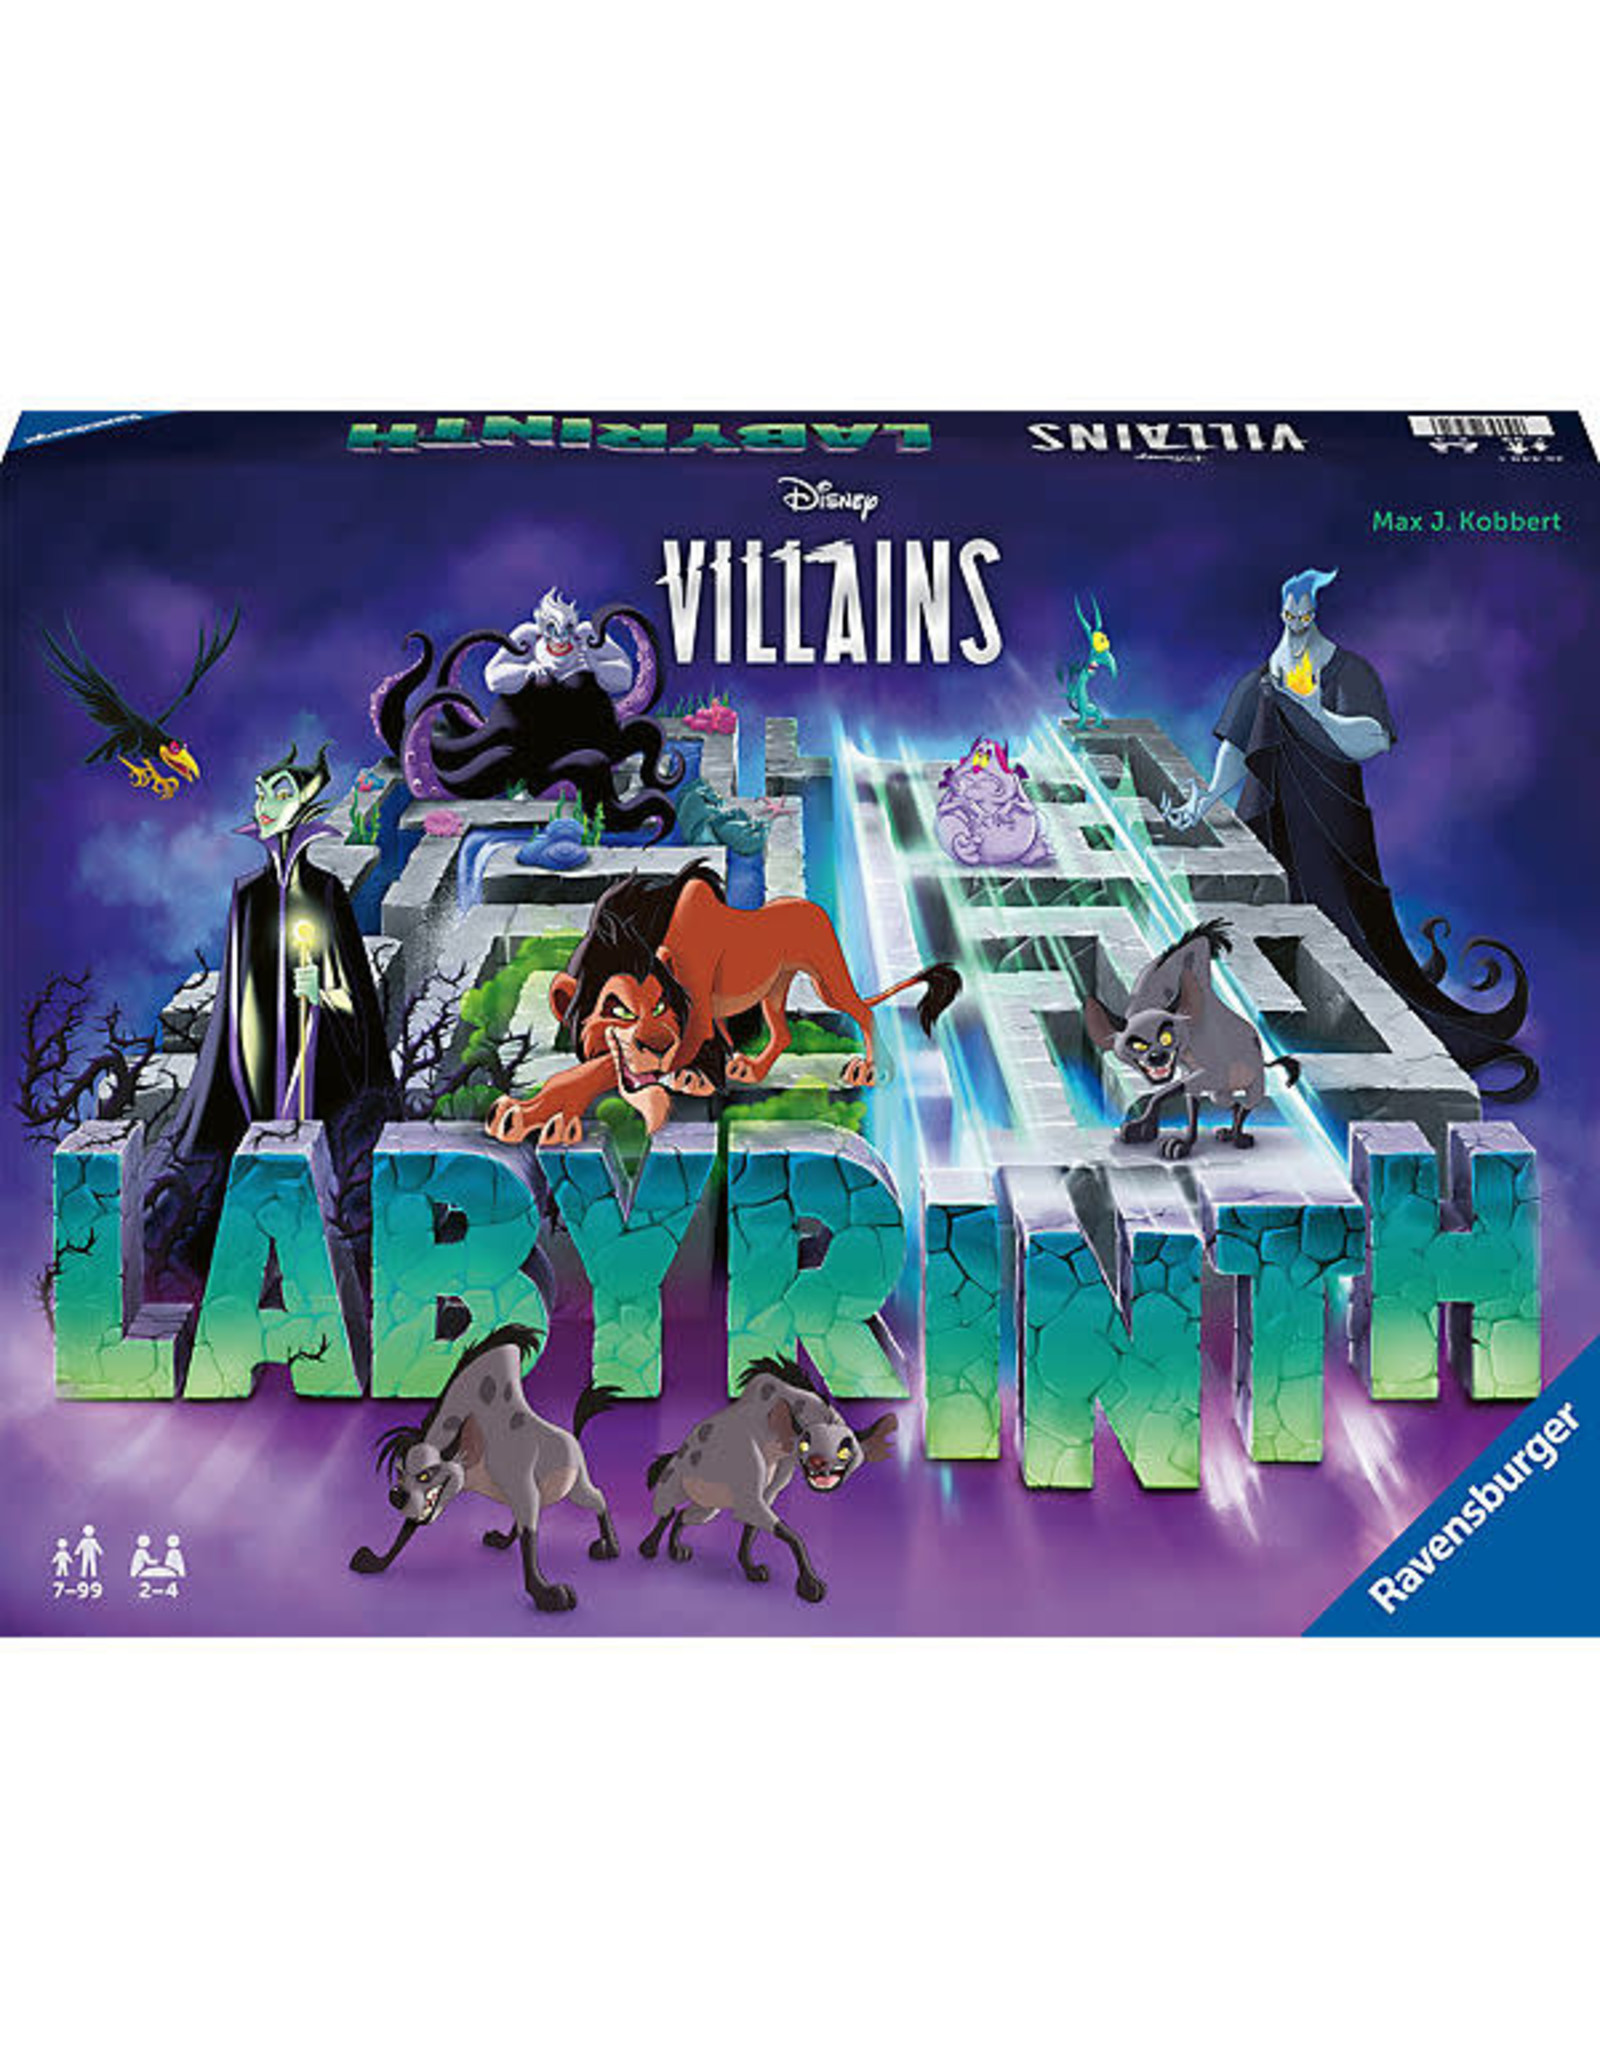 Ravensburger 3D Labyrinth Family Board Game for 2-4 players, Kids & Adults  Age 7 & Up - So Easy to Learn & Play with Great Replay Value